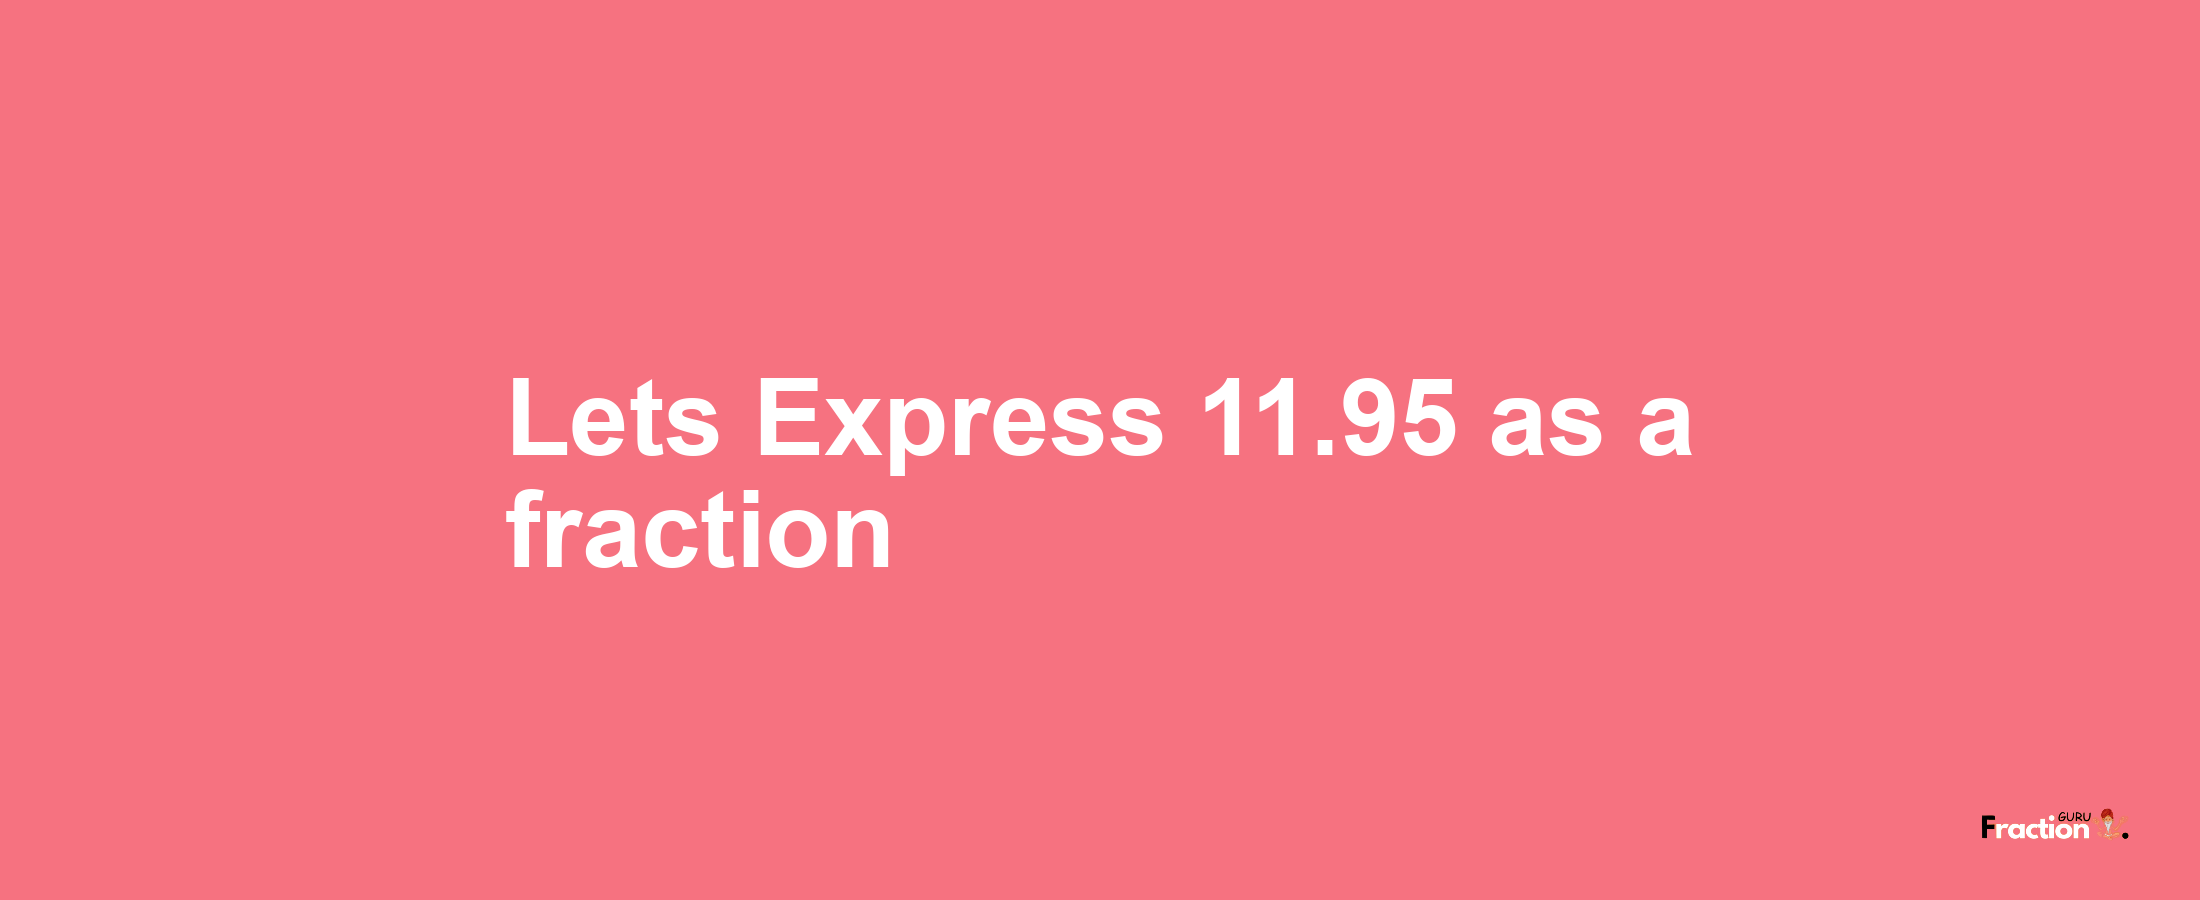 Lets Express 11.95 as afraction